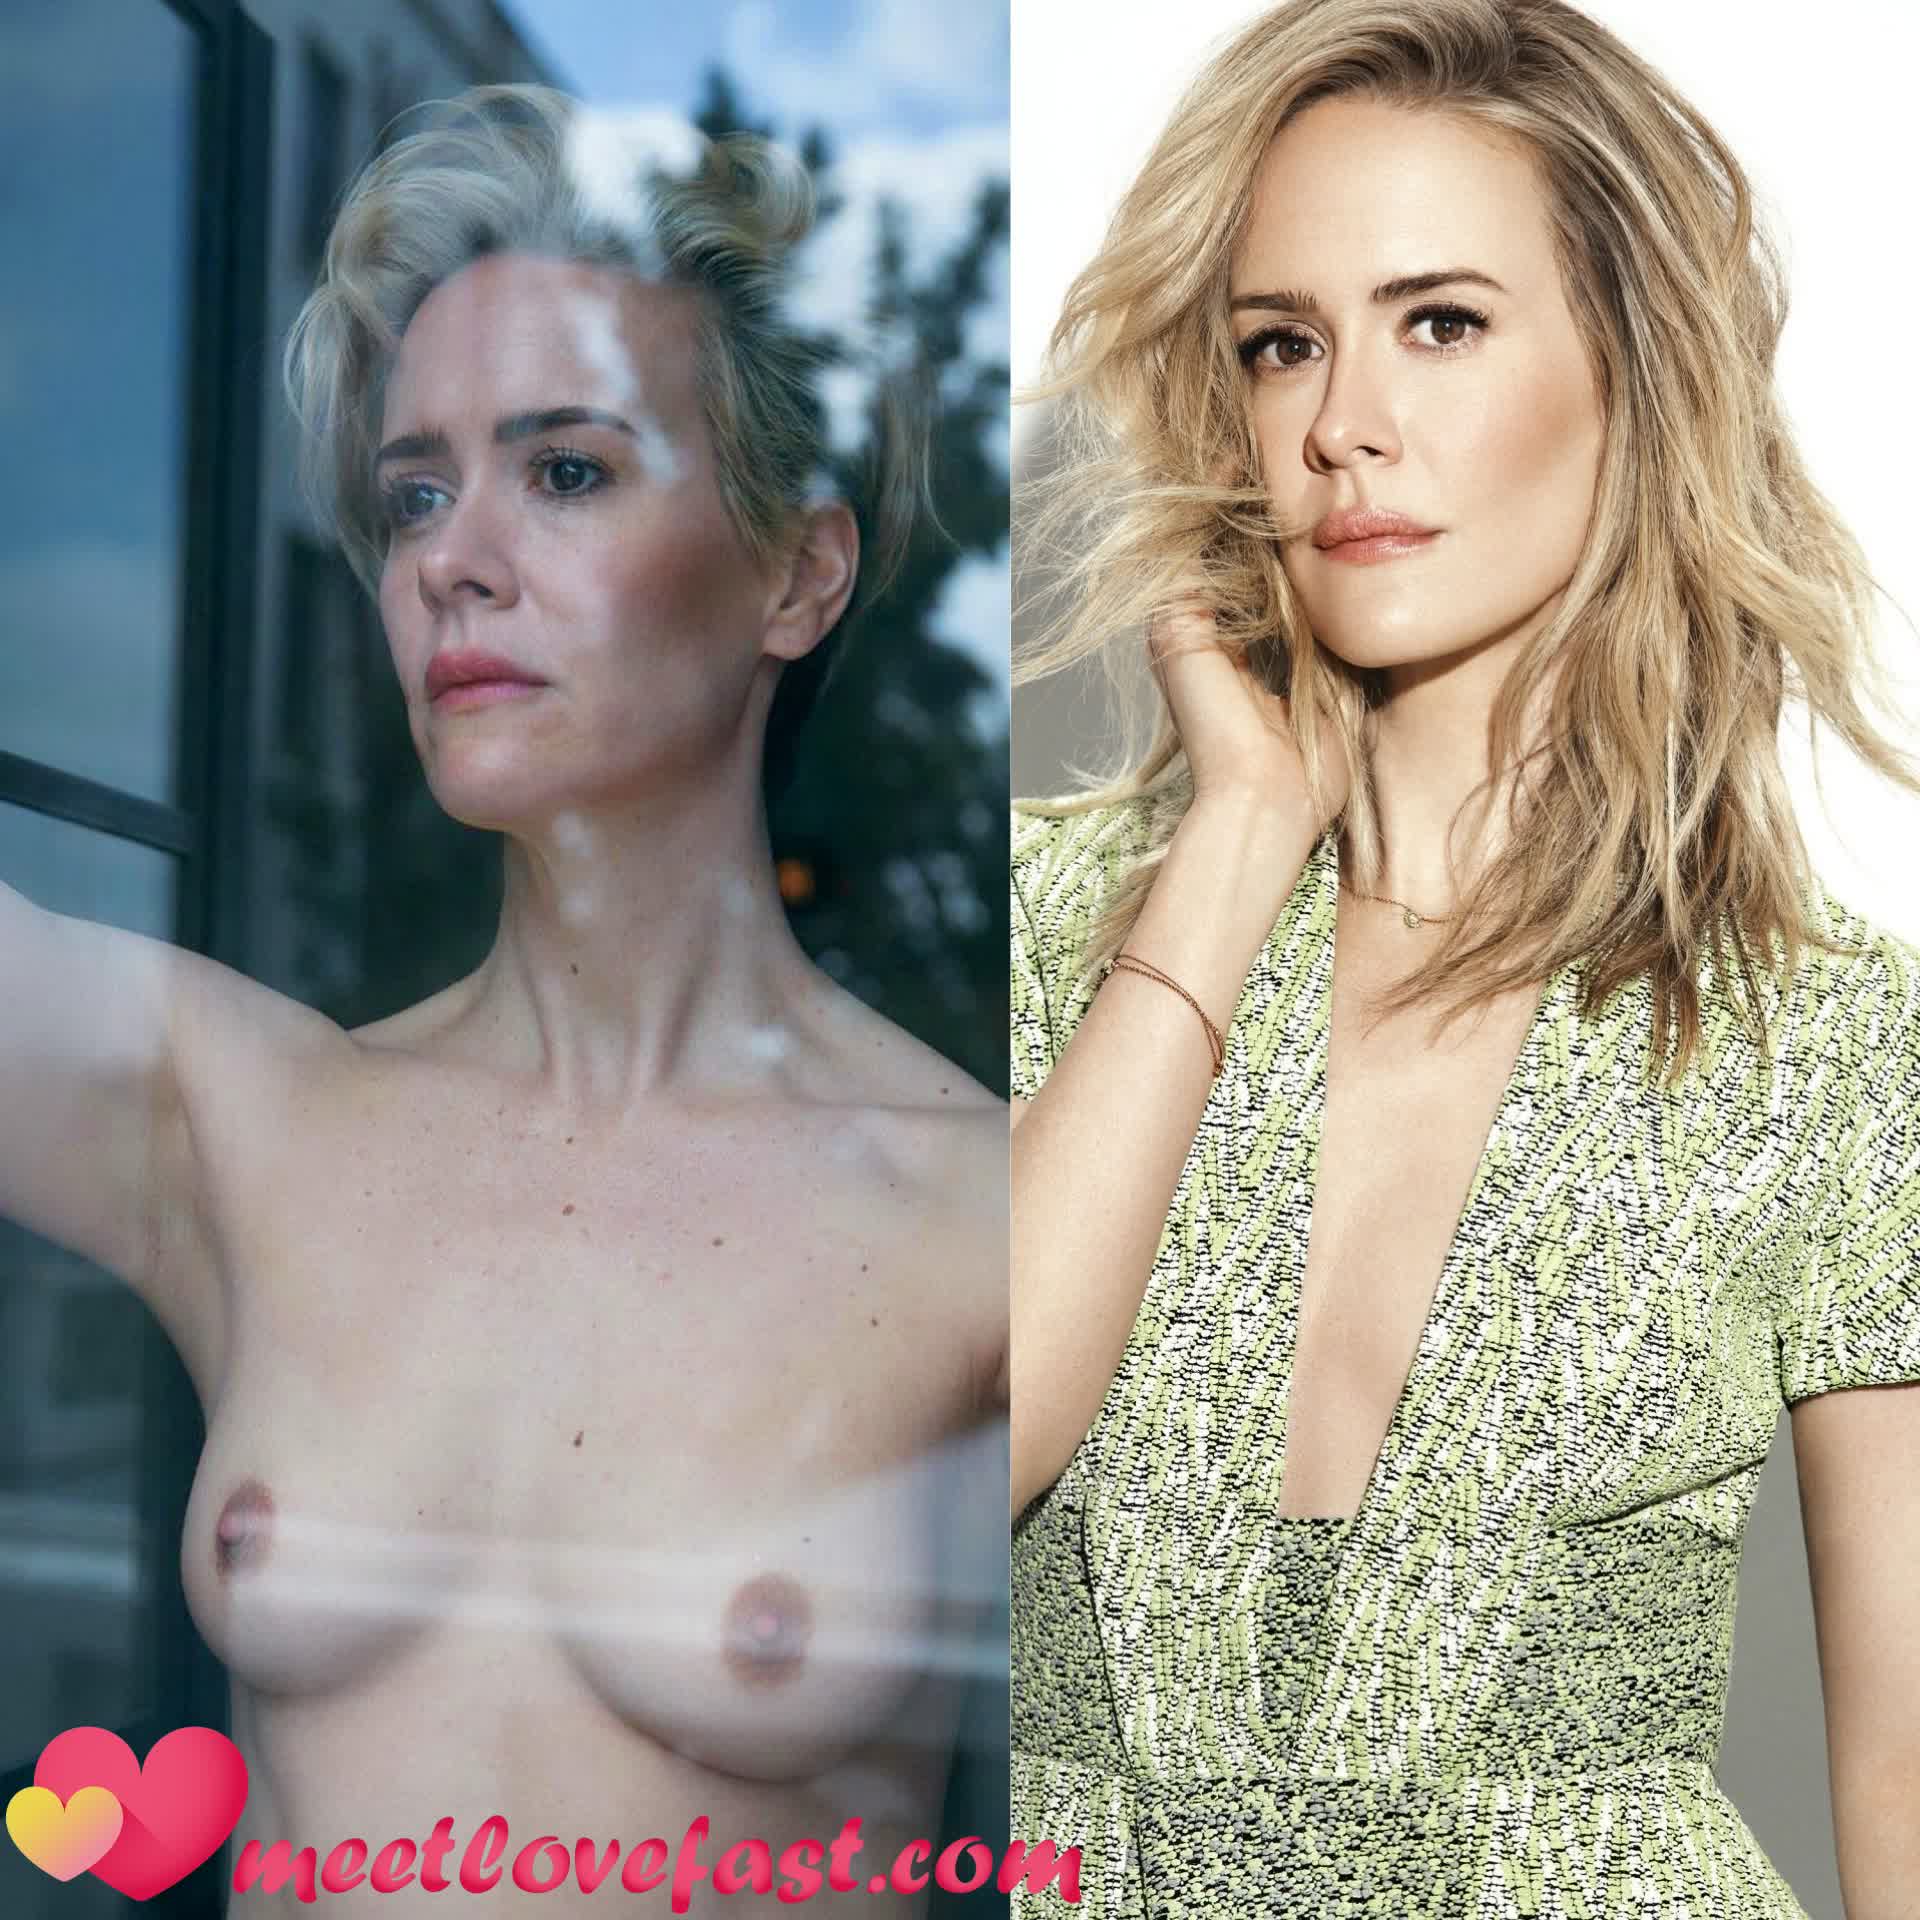 Sarah Paulson This Post On Onoffcelebs Came From Meetlovefast Com Register To Get An Access NSF